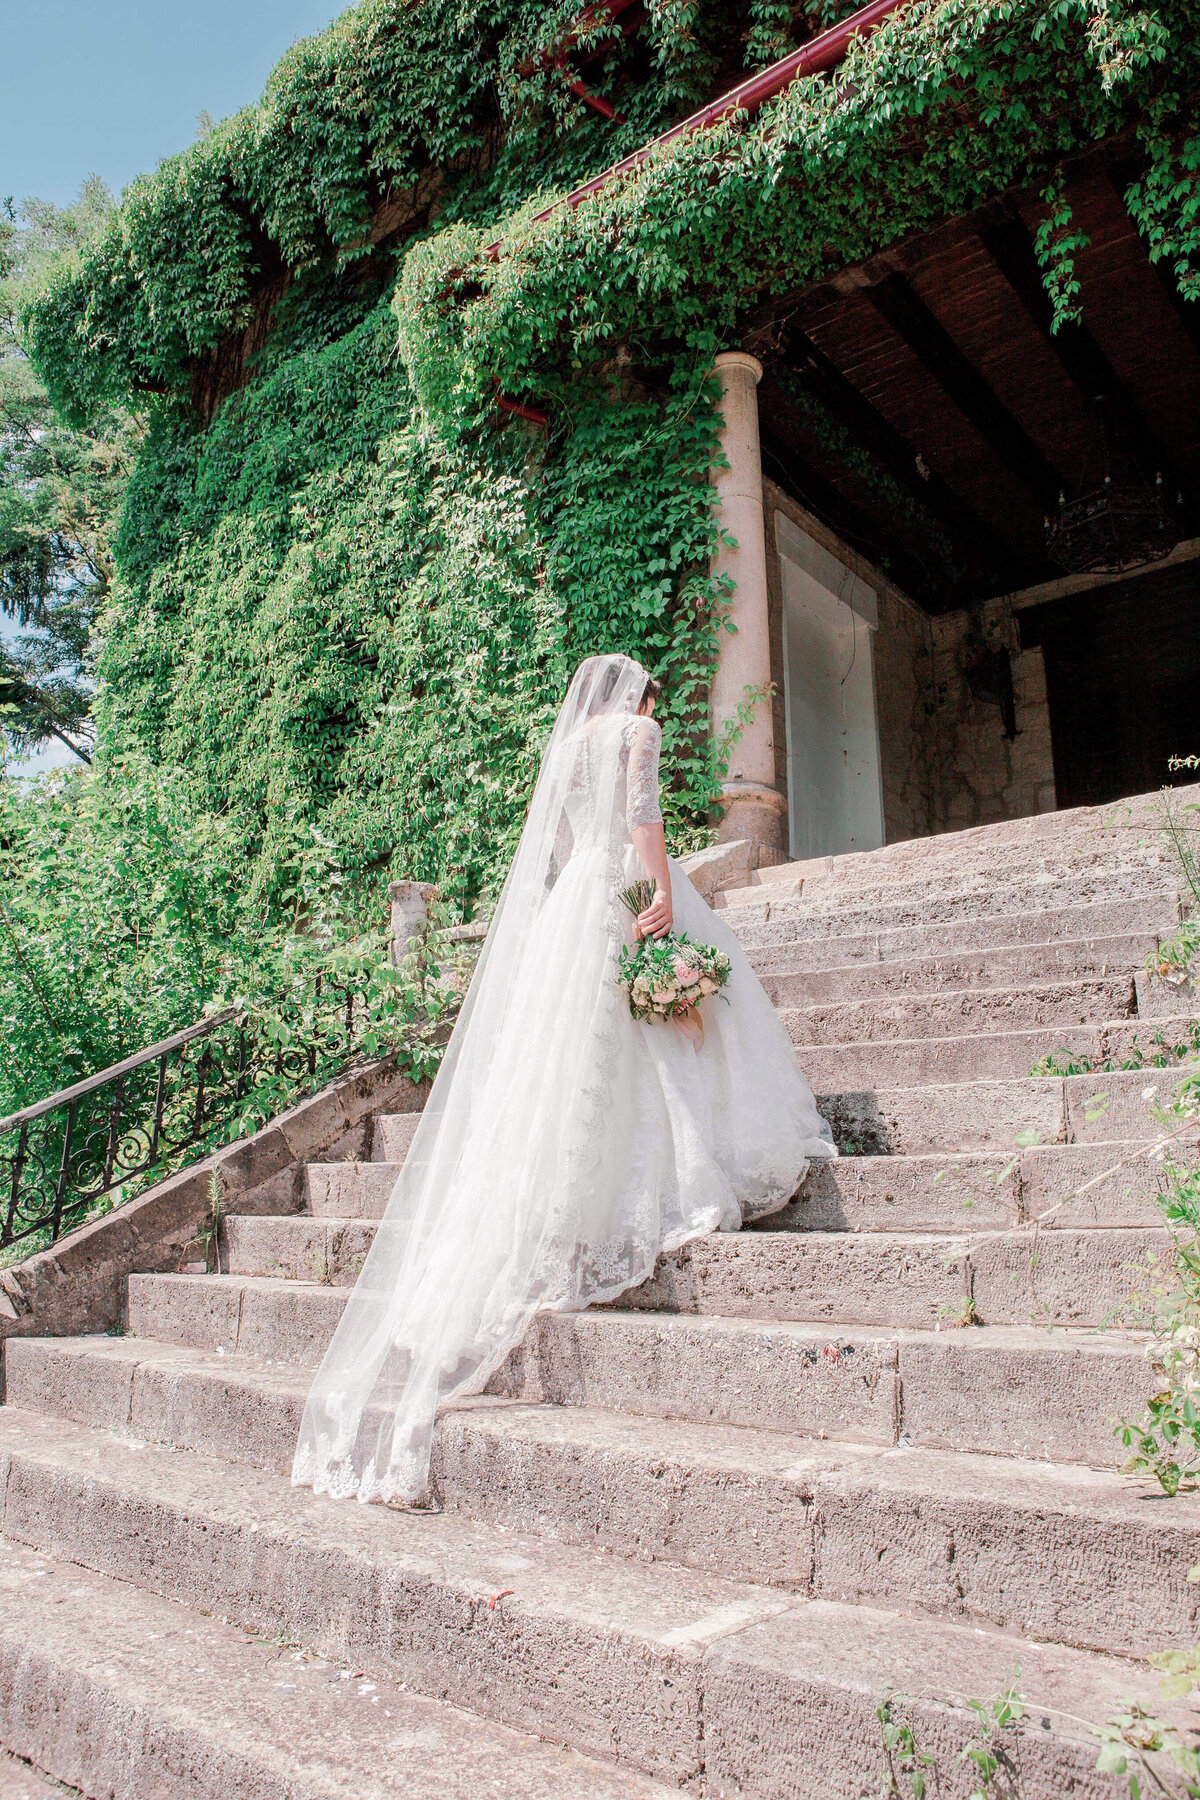 A bride in a wedding dress walks up a staircase on her wedding day.